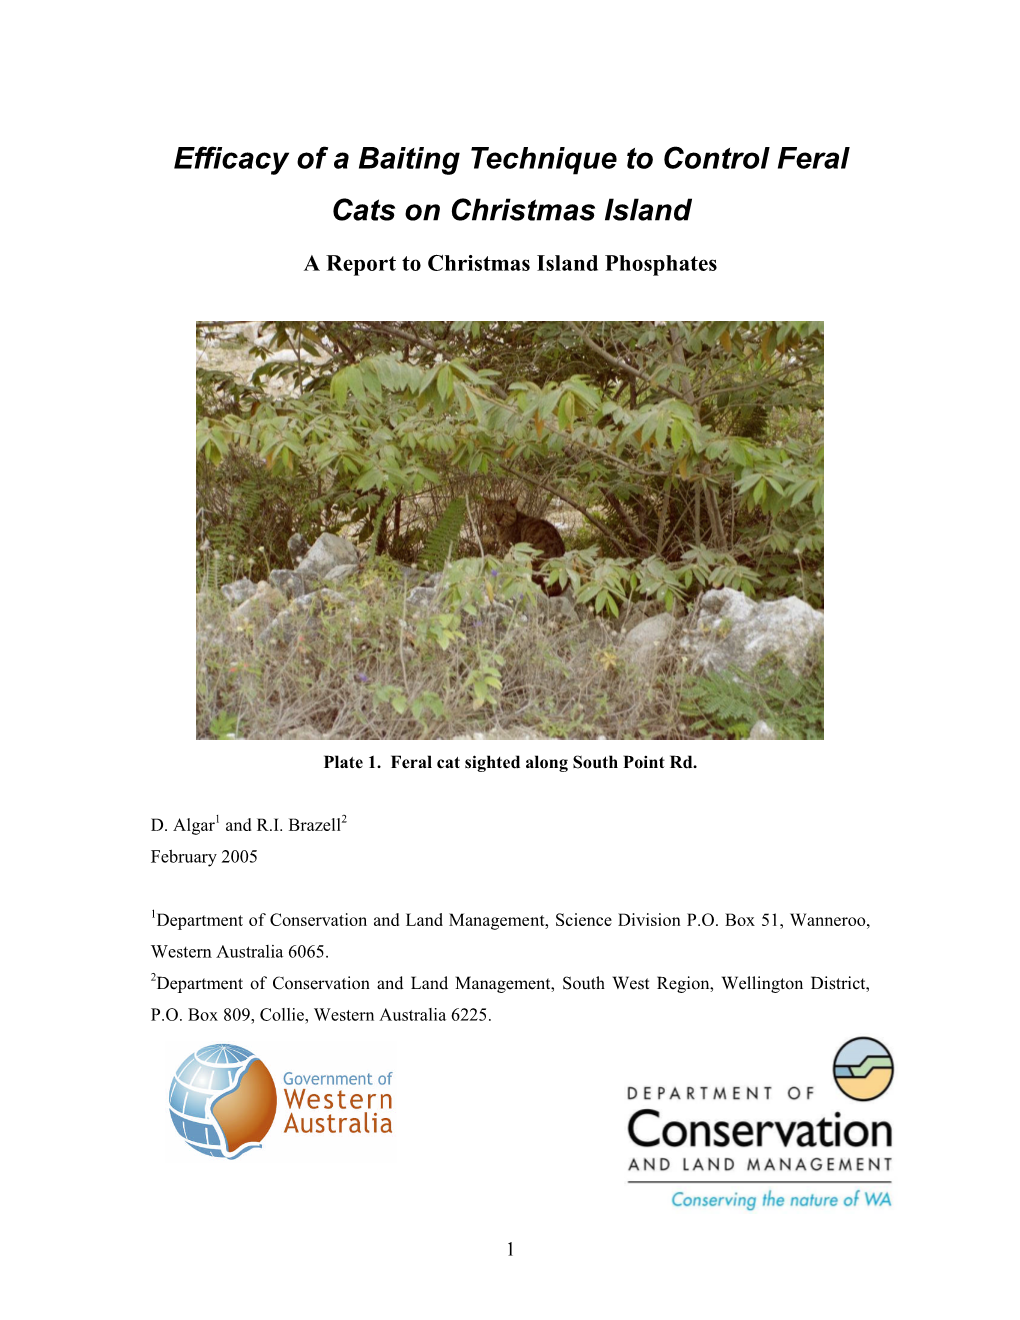 Efficacy of a Baiting Technique to Control Feral Cats on Christmas Island